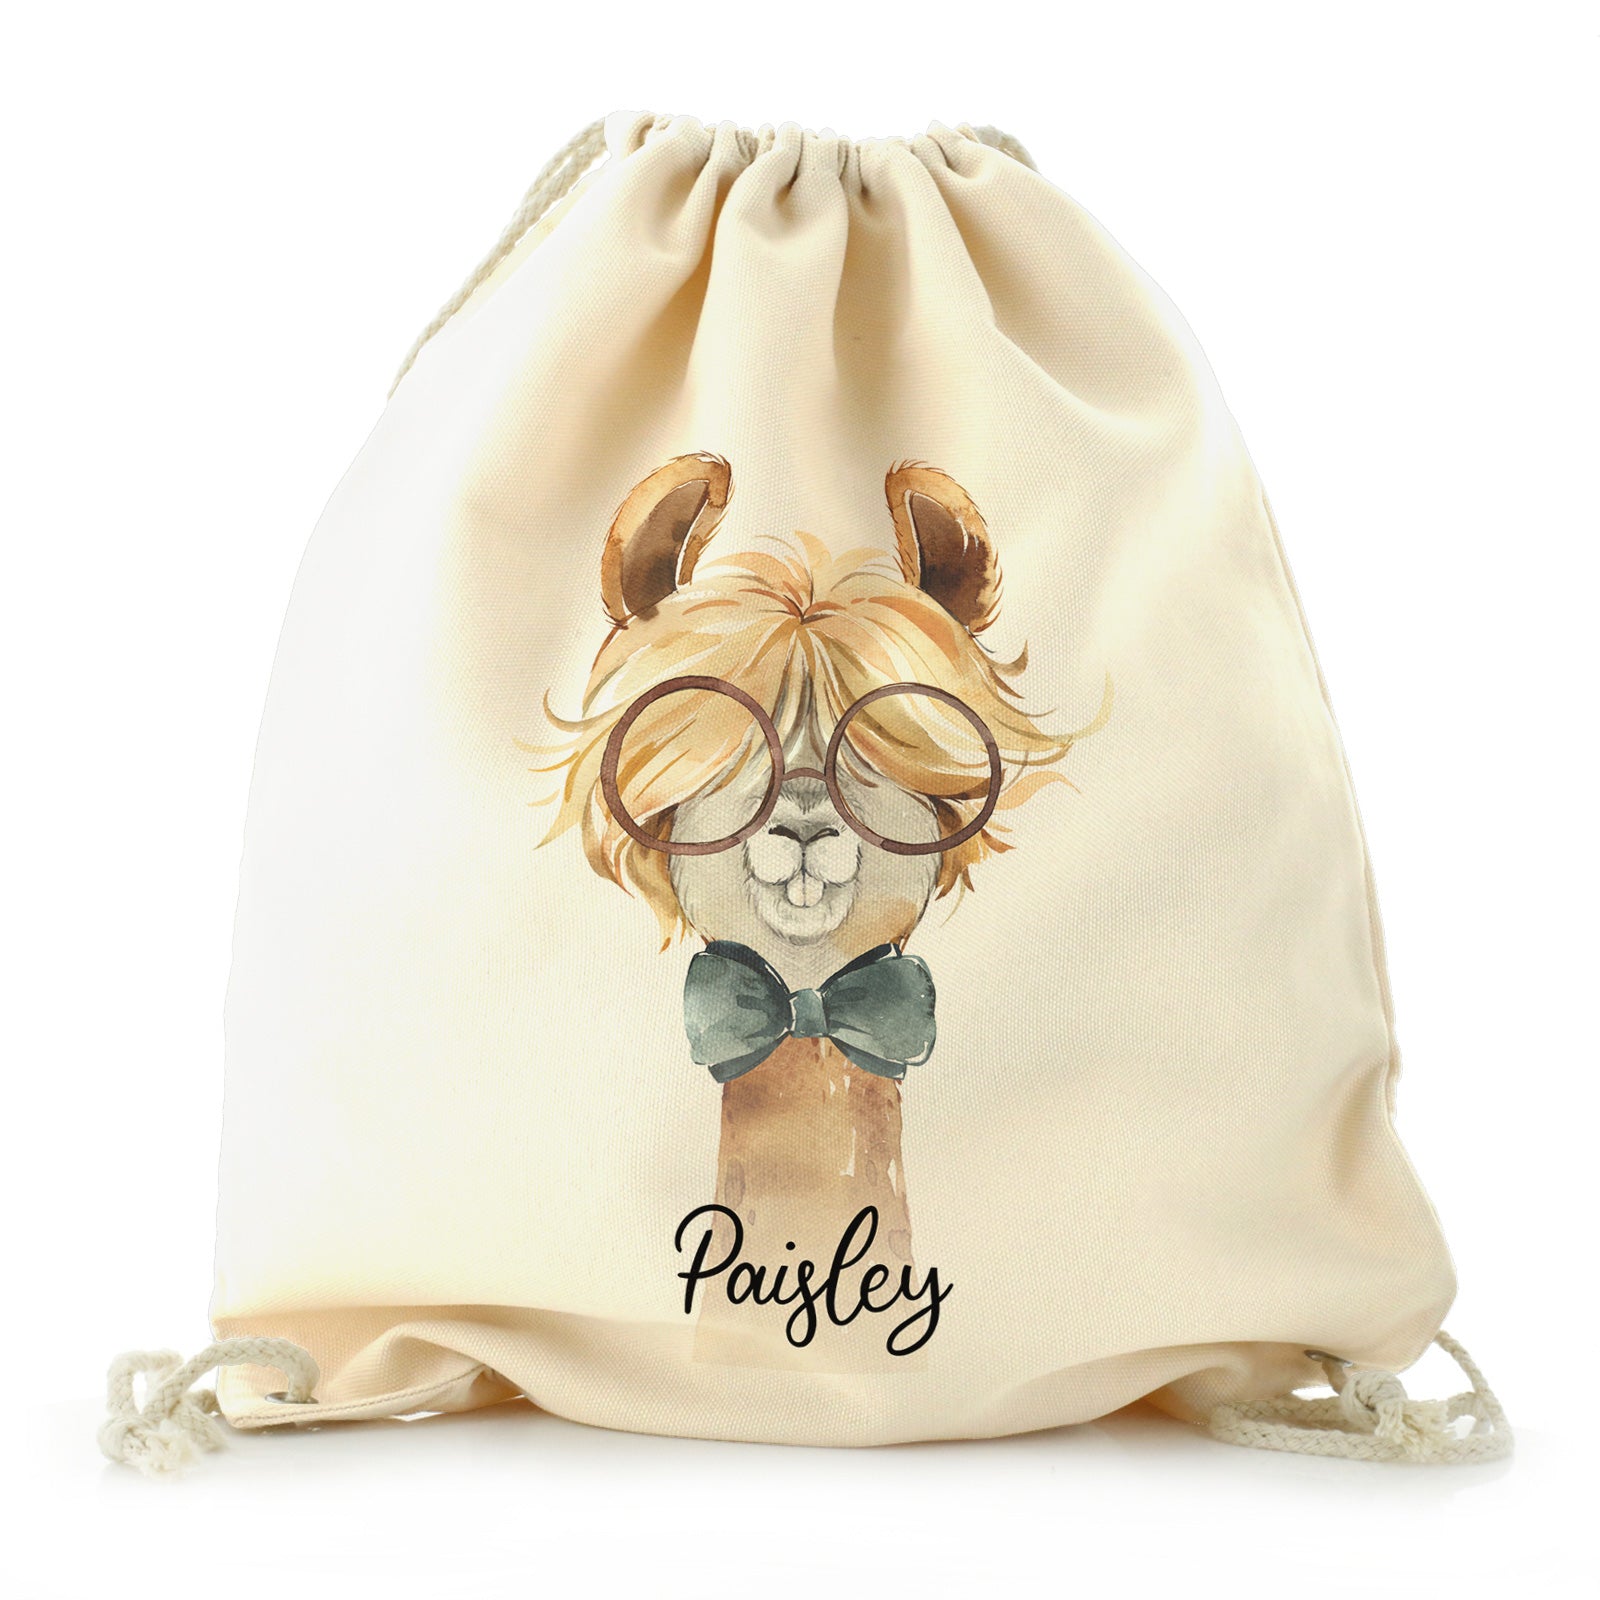 Personalised Canvas Drawstring Backpack with Alpaca Bow Tie and Glasses and Cute Text